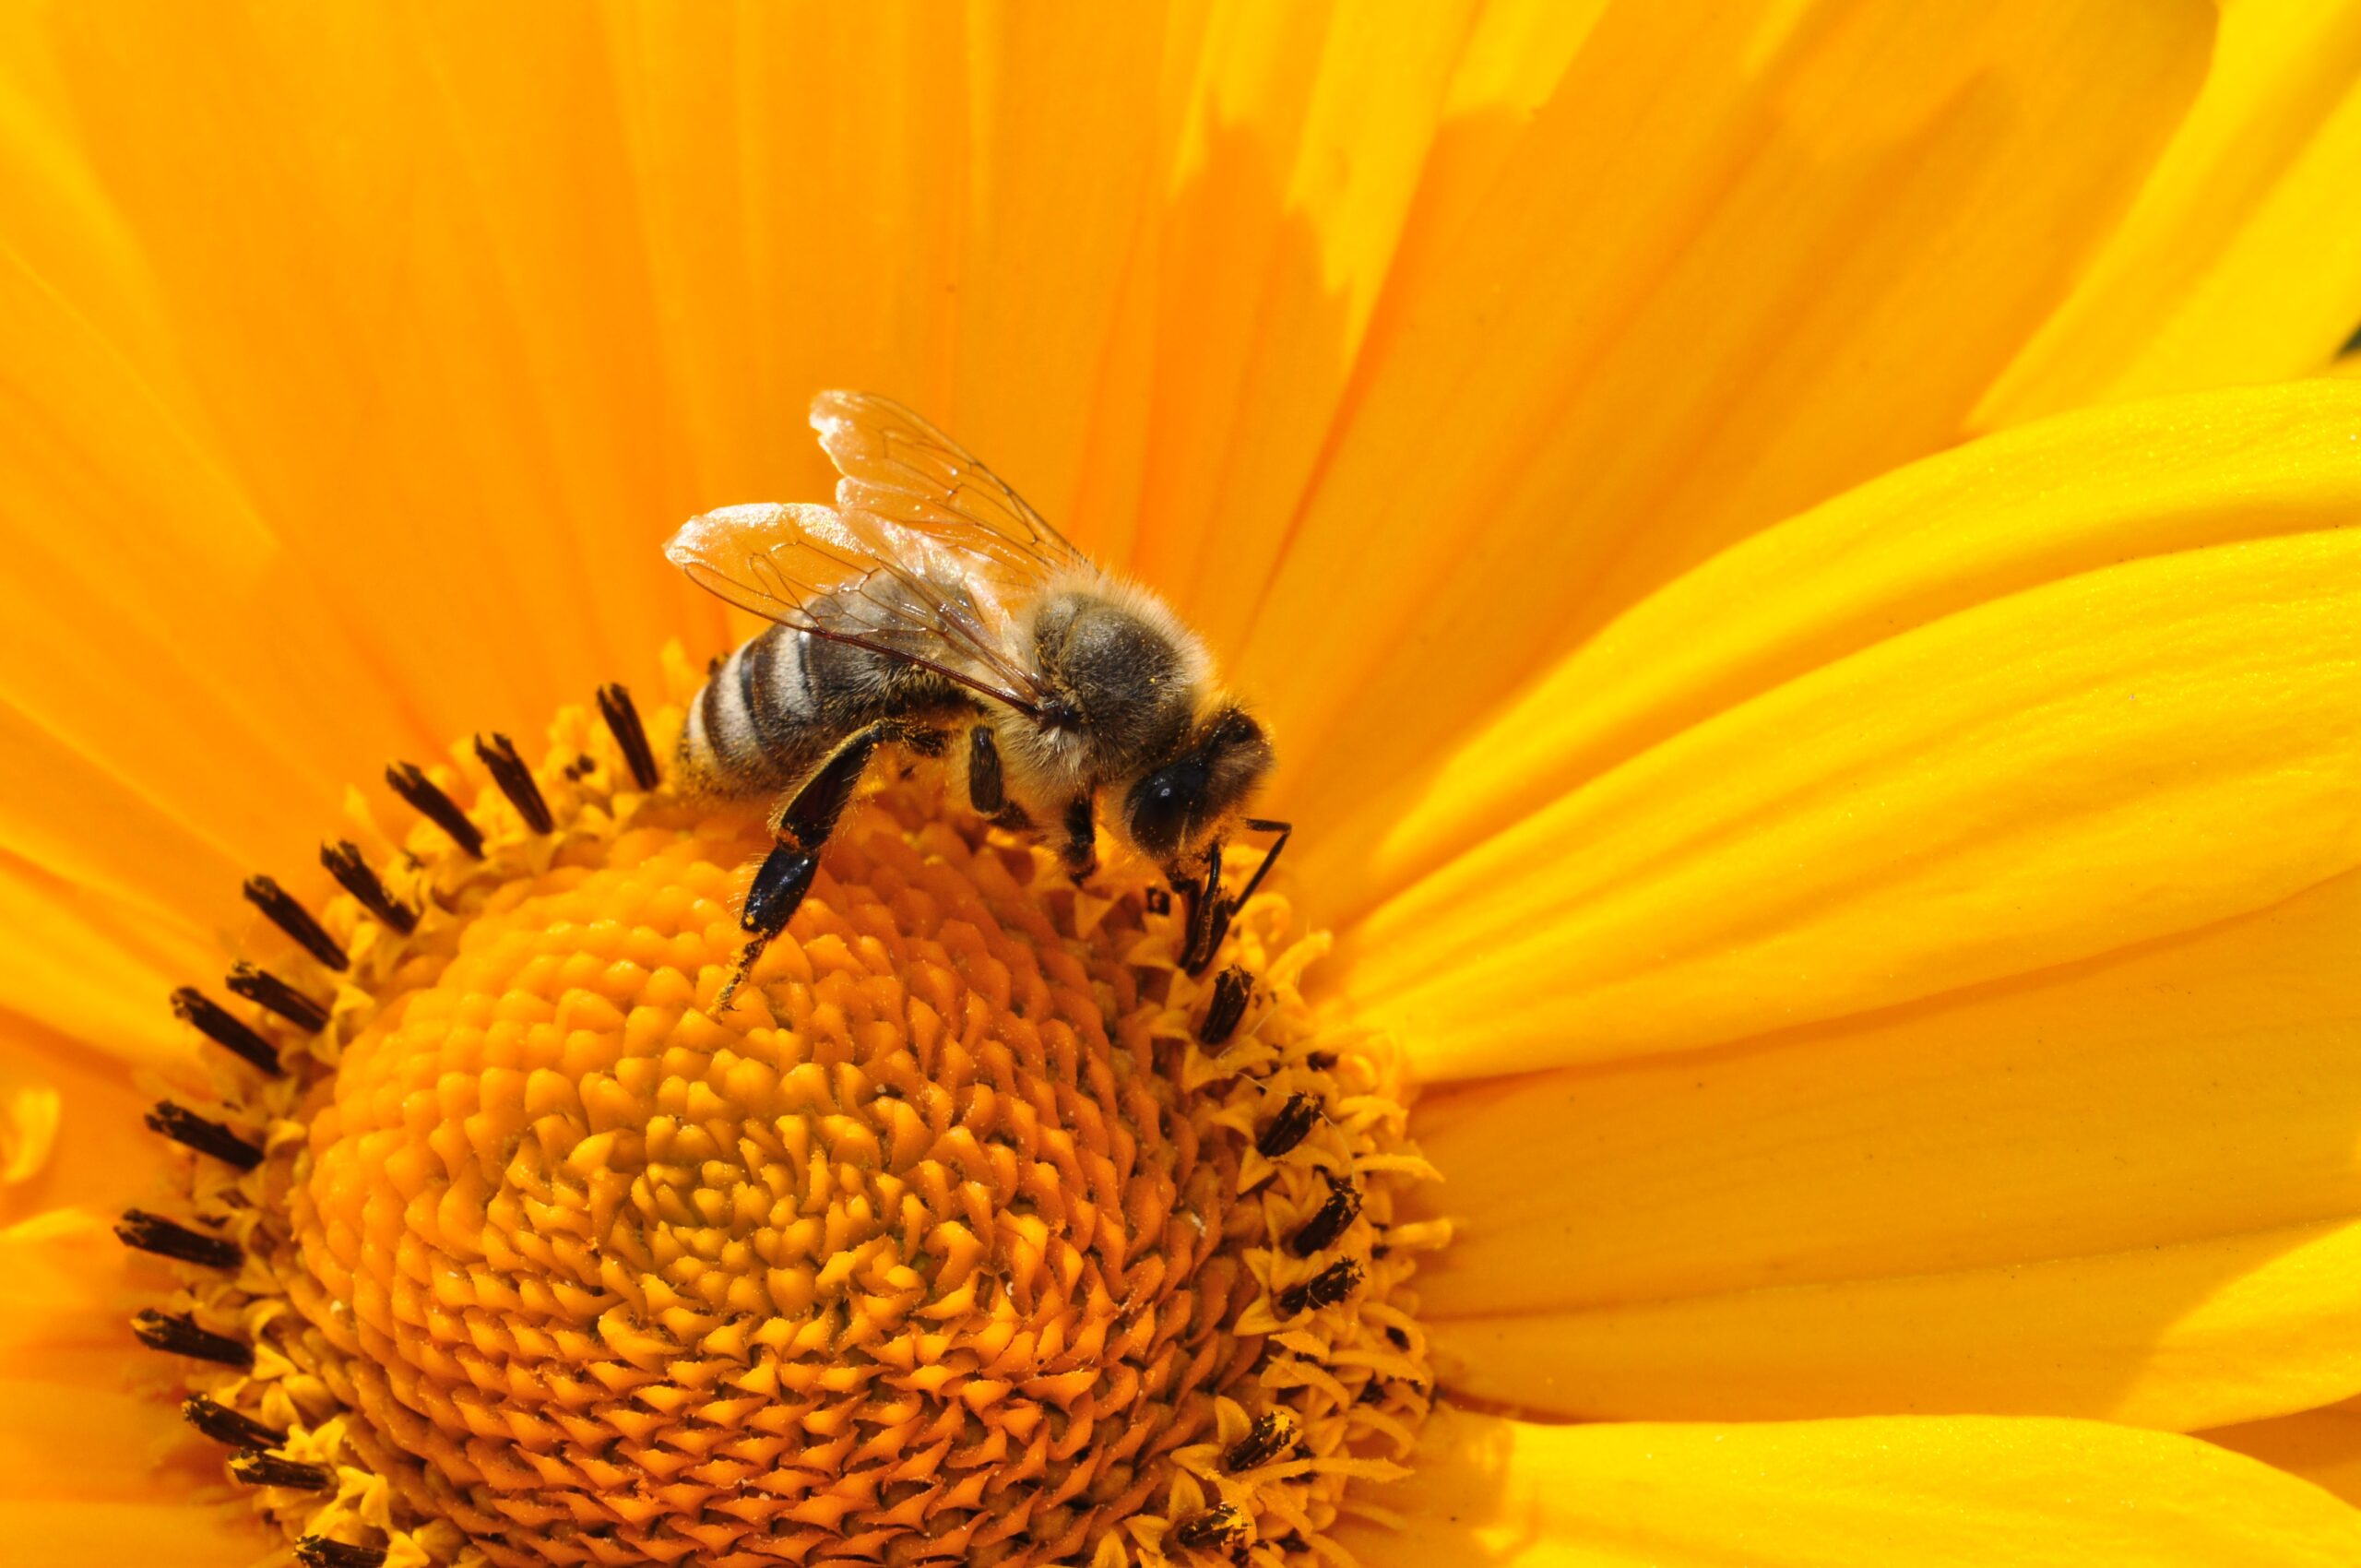 Bees deal with darkness the same way humans do